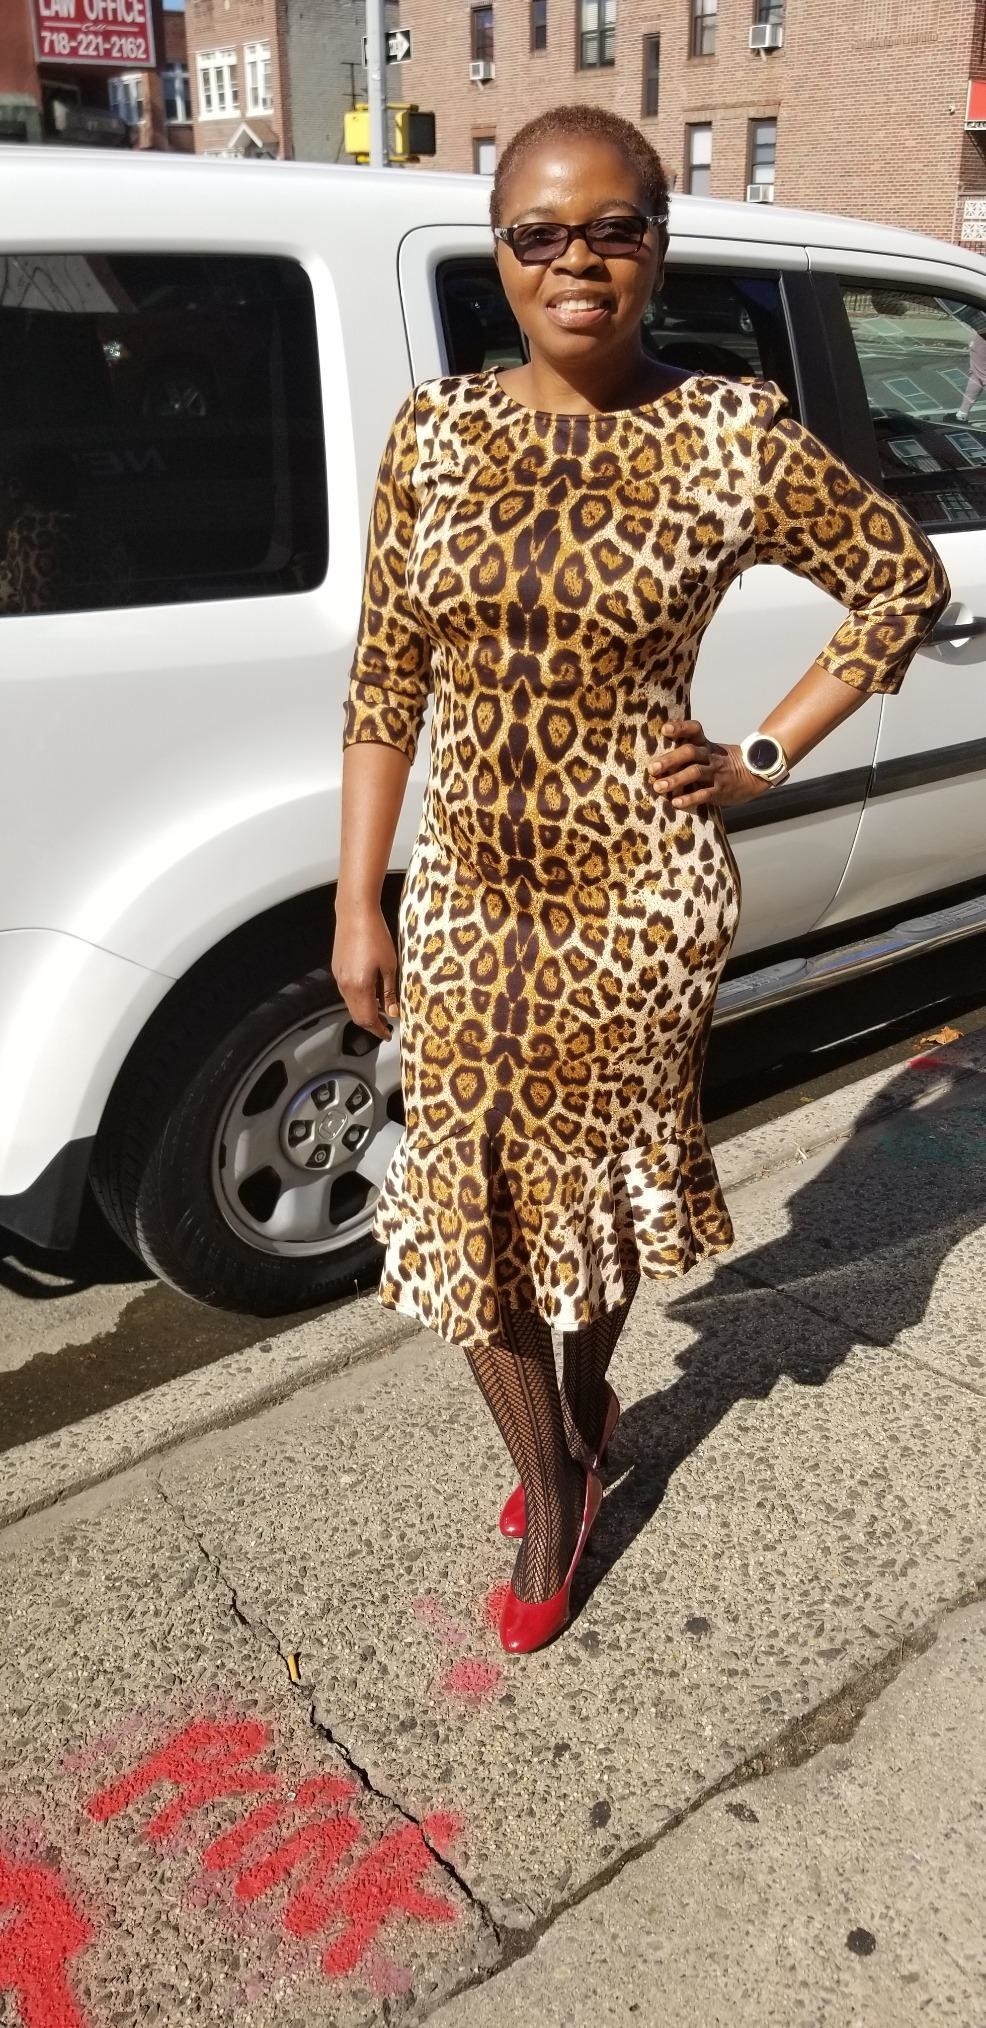 a customer review photo of them wearing a leopard print fit and flare dress standing in front of a white car